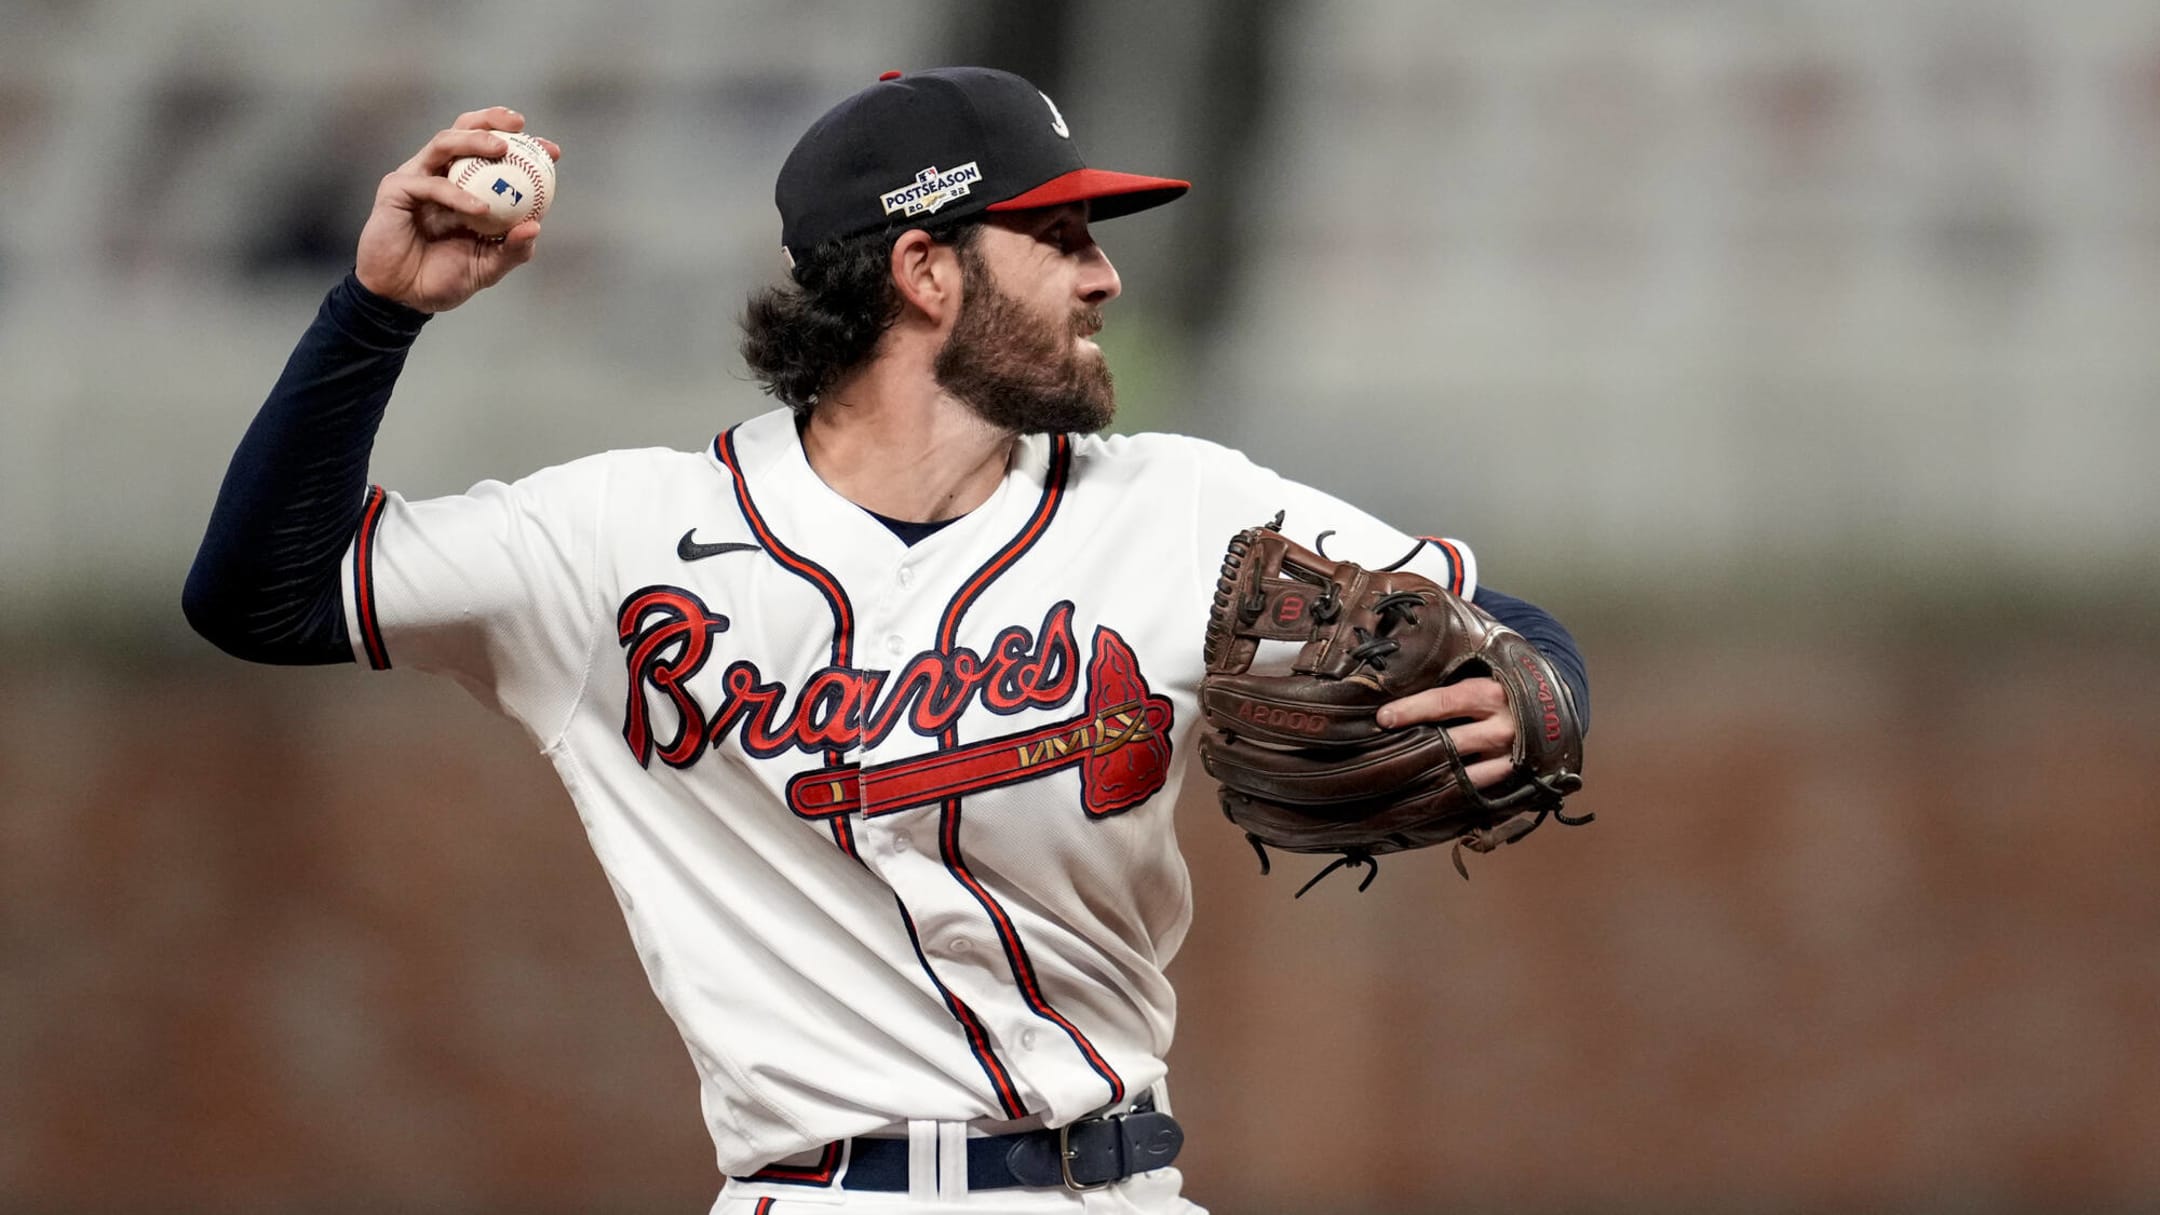 Examining the Braves roster decisions for September/October